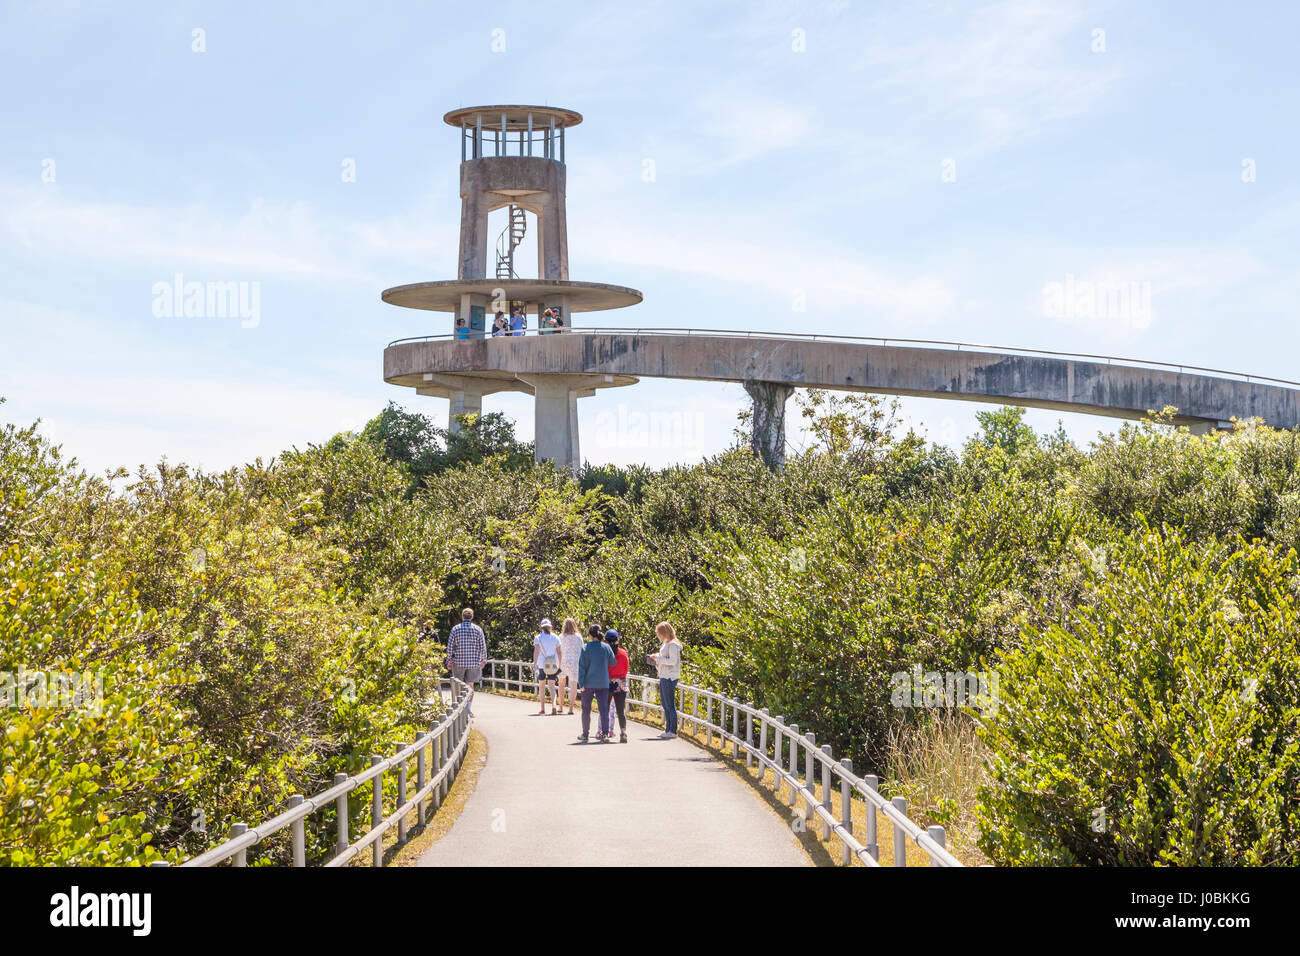 Miami, Fl - March 15, 2017: The Shark Valley Observation Tower in the Everglades National Park. Florida, United States Stock Photo